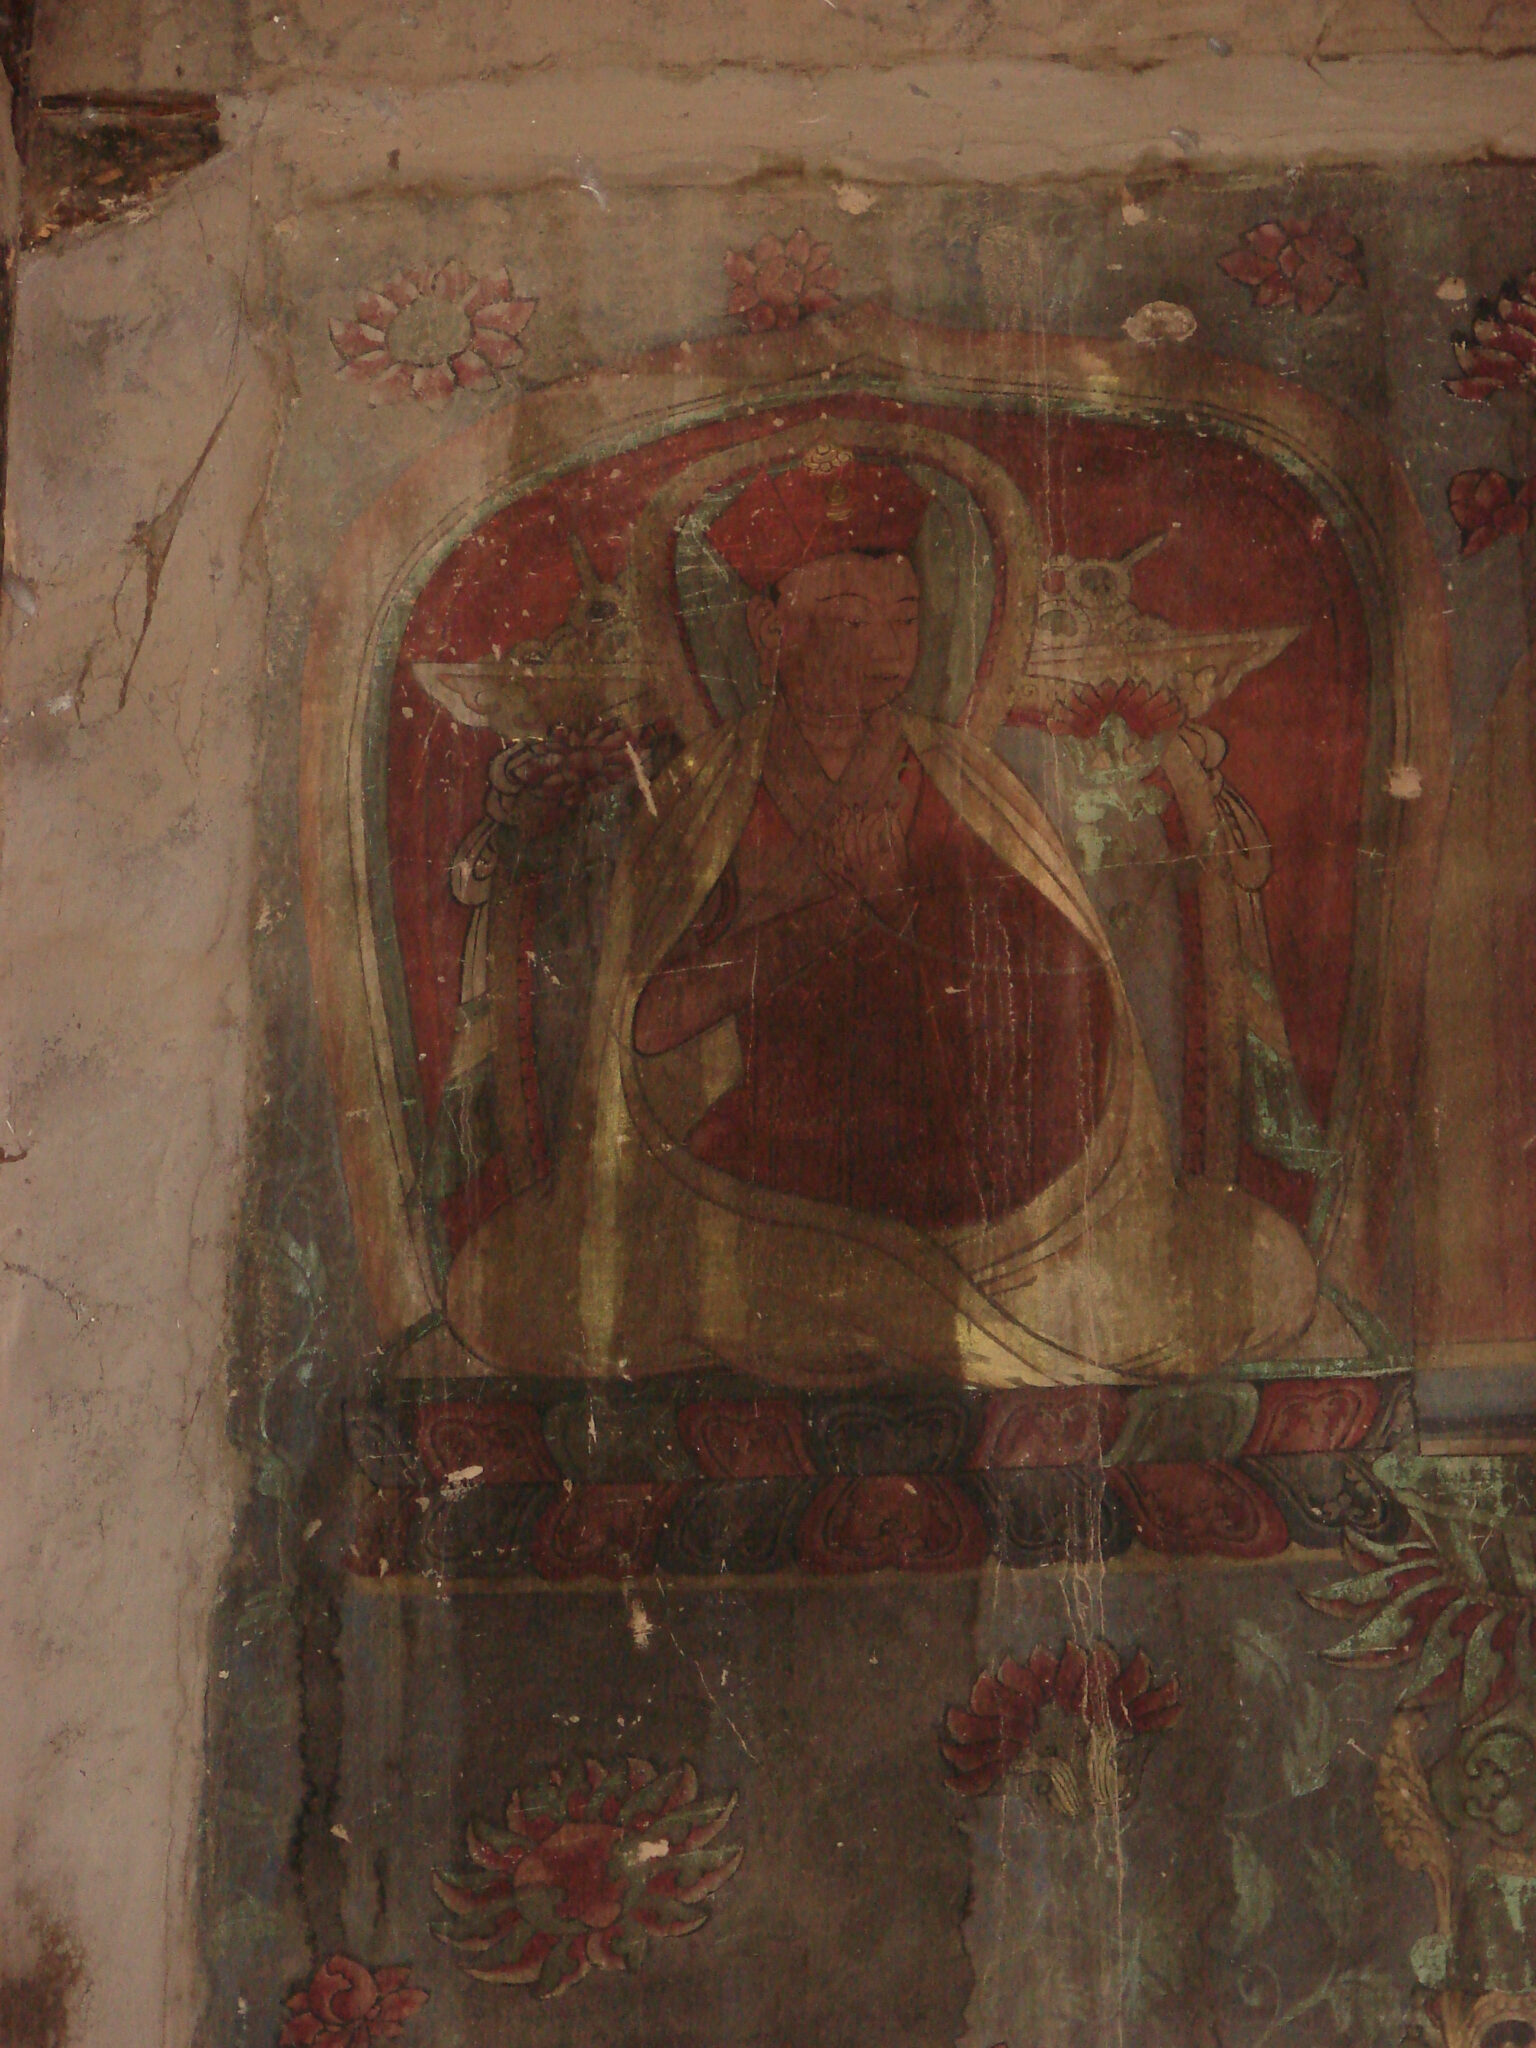 Detail of water-stained mural featuring yellow-robed figure seated above field with floral motif